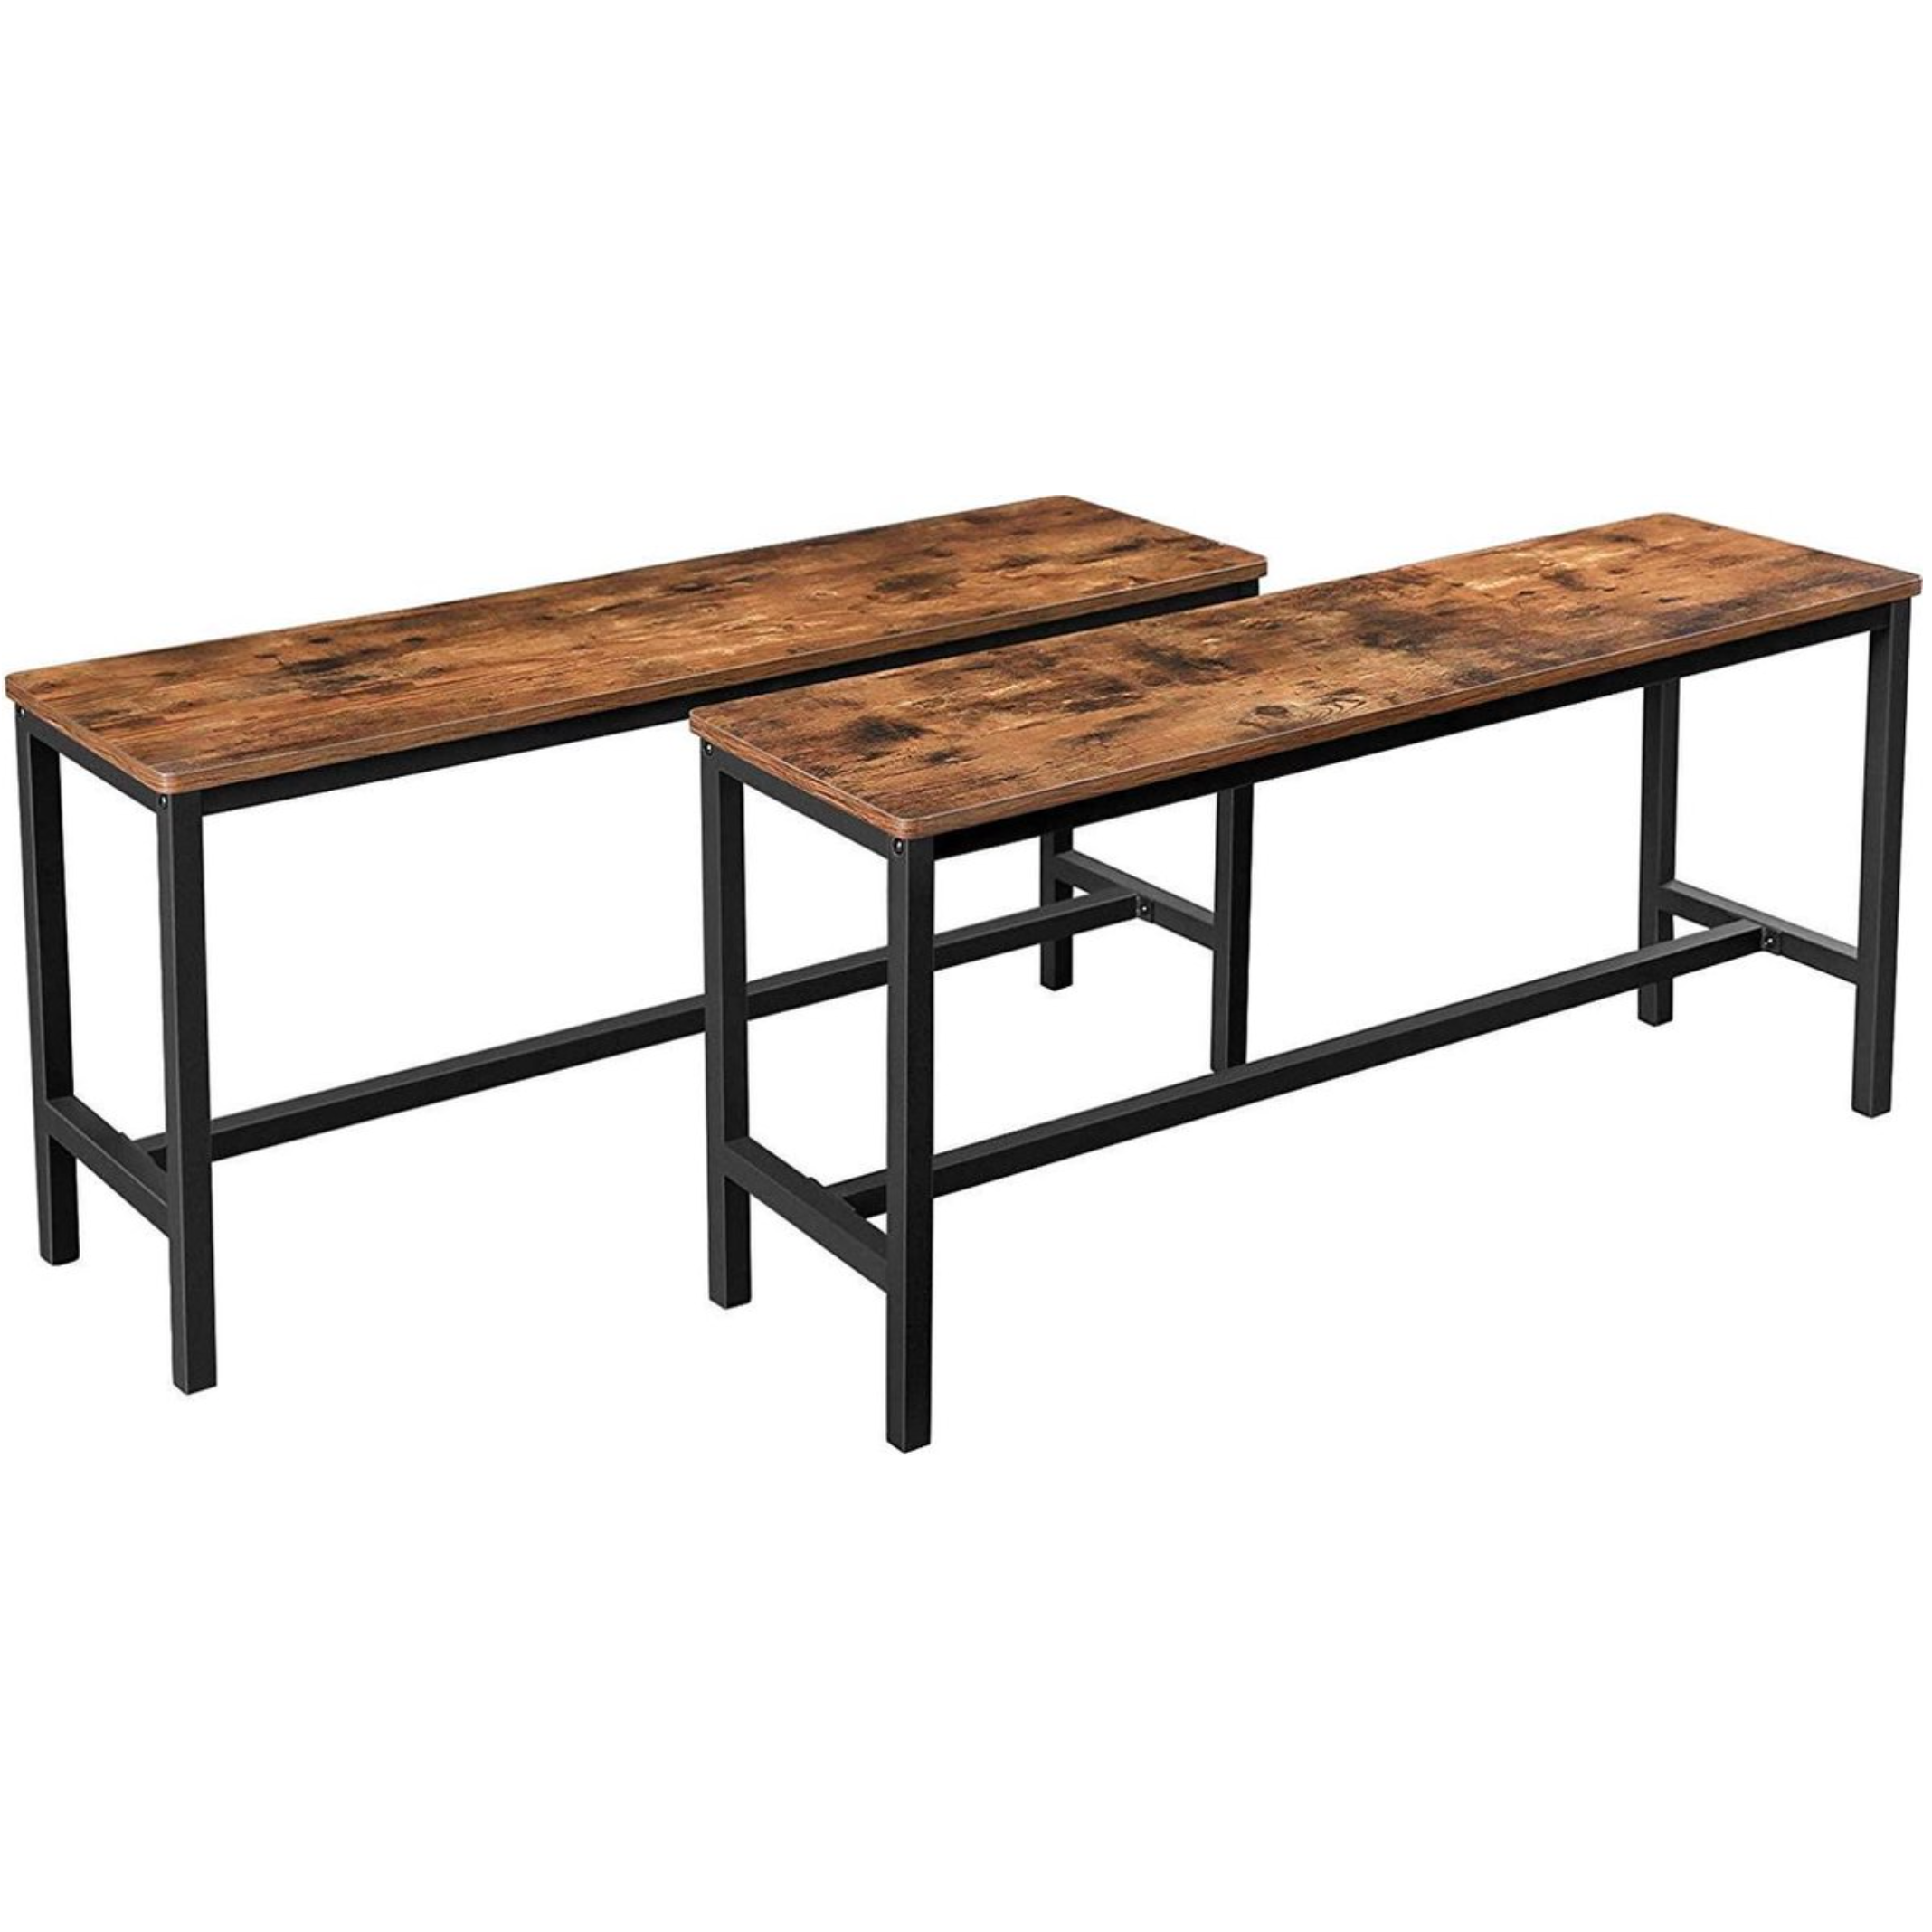 Nancy's Industrial Set of 2 Table Benches - Dining Room Bench - 108 x 32.5 x 50 cm - Benches